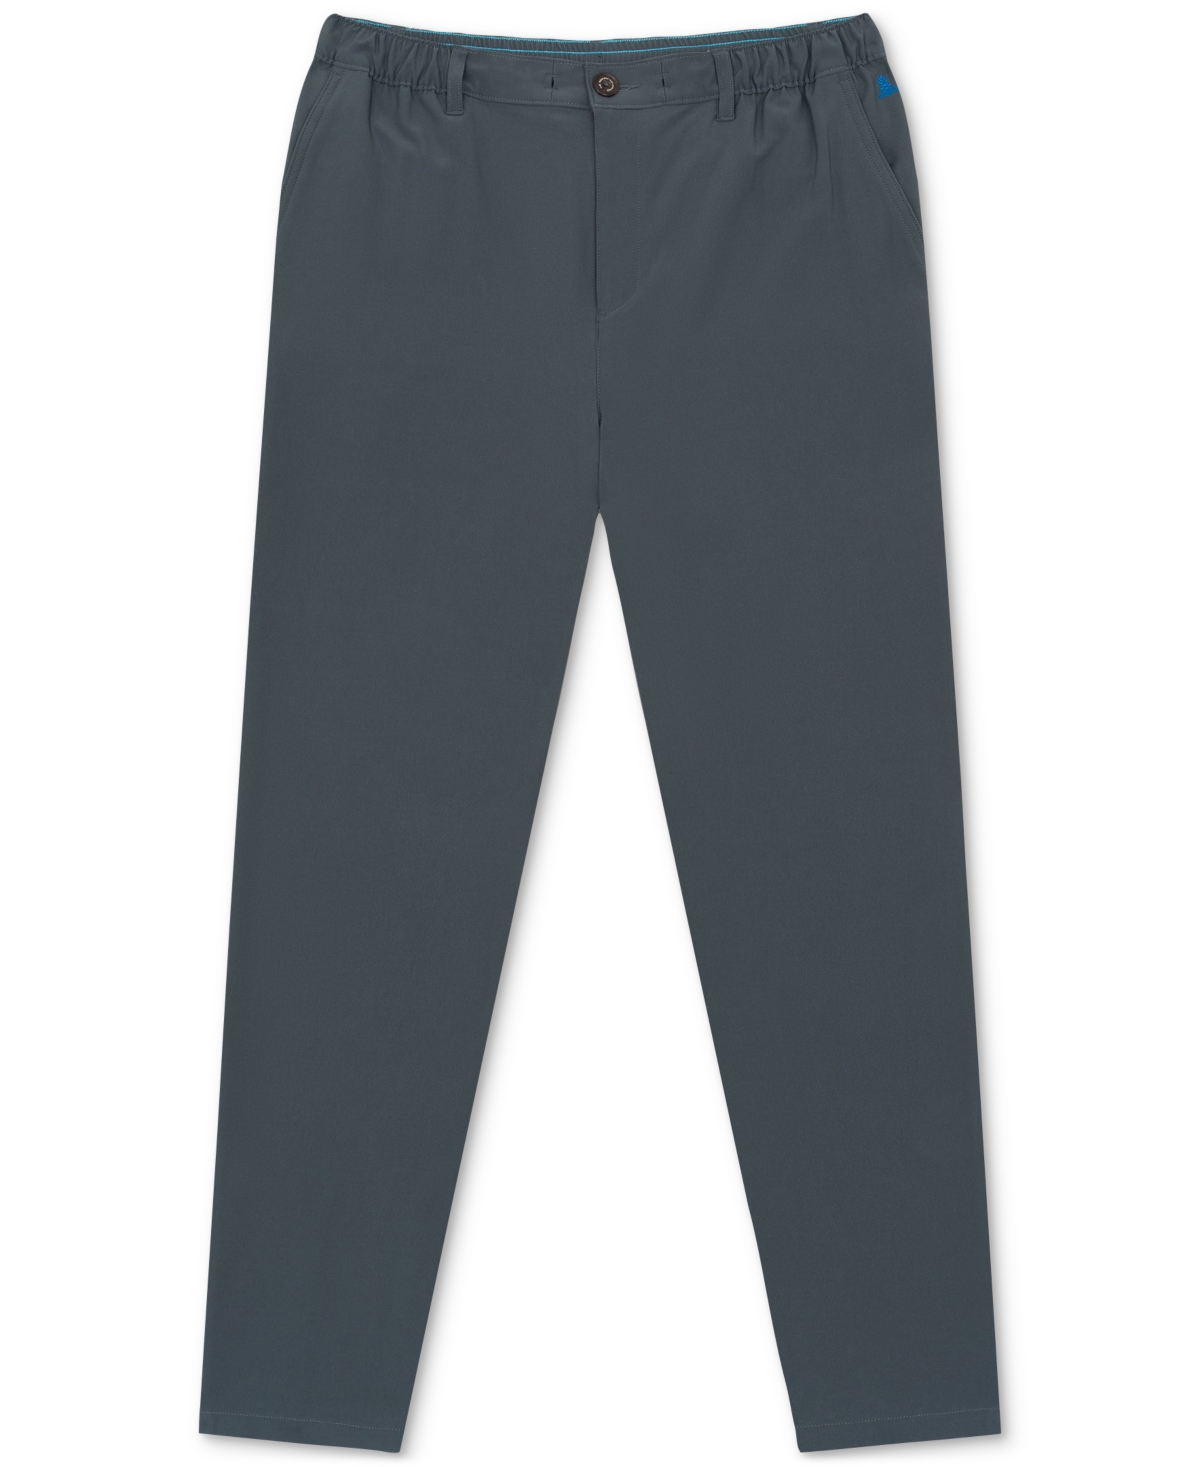 Men's The Musts Everywear Modern-Fit Performance Pants - Charcoal -